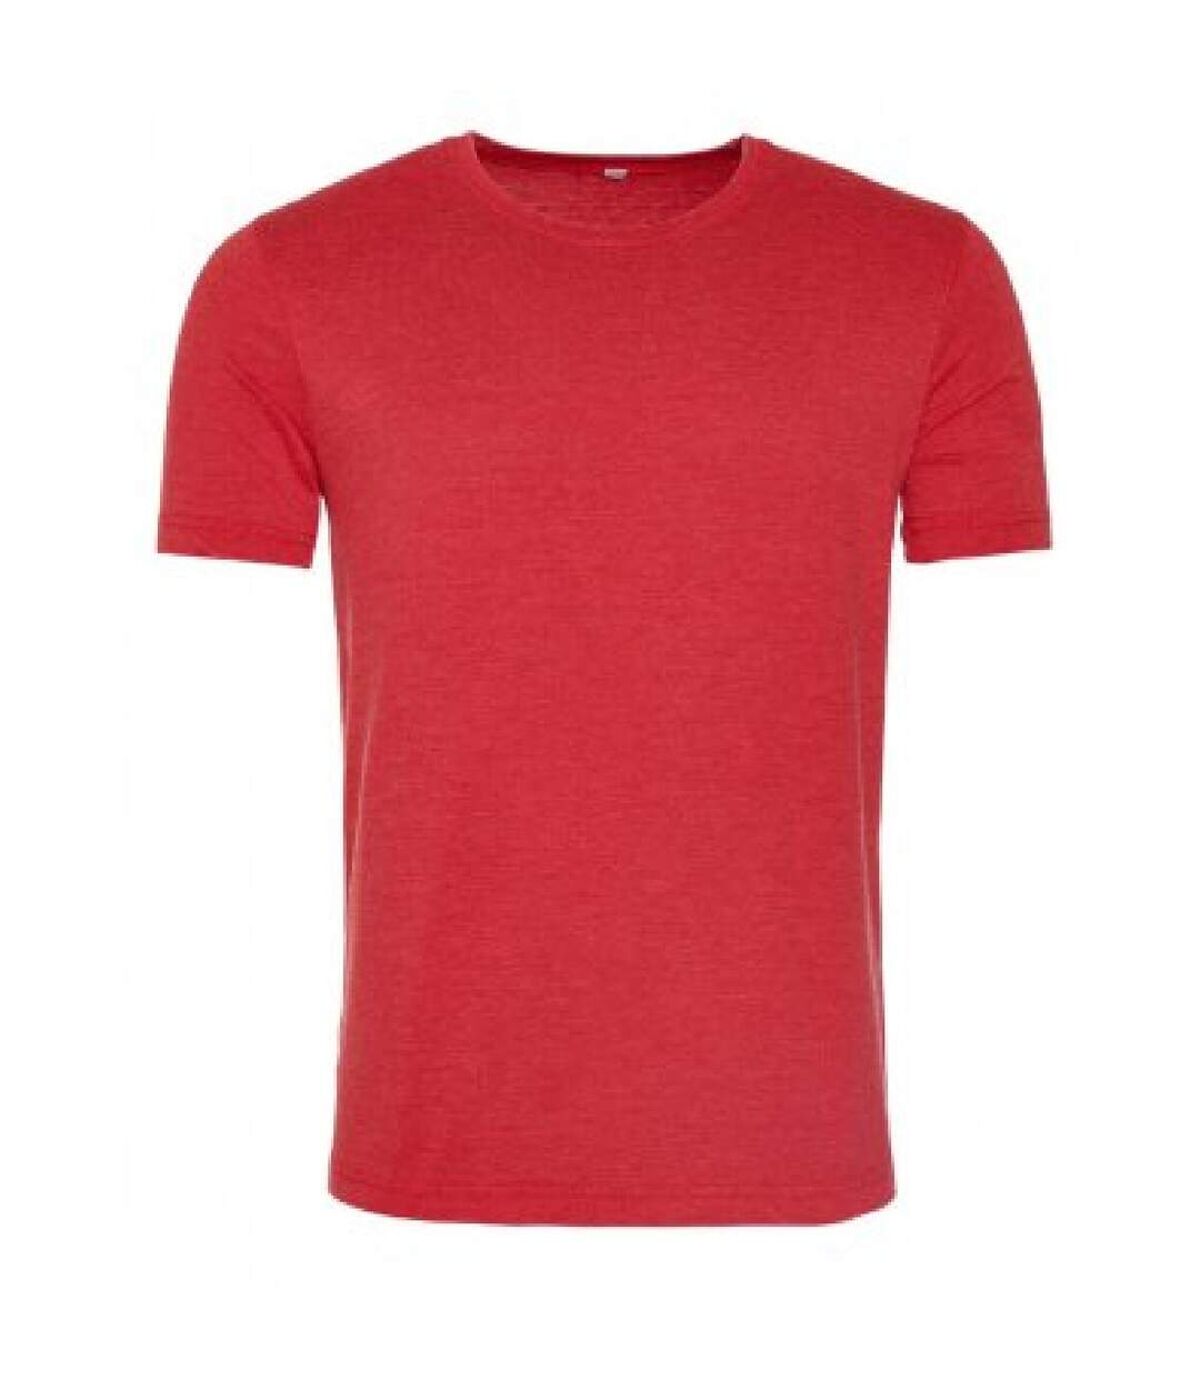 AWDis Mens Washed T Shirt (Washed Fire Red) - UTPC2899